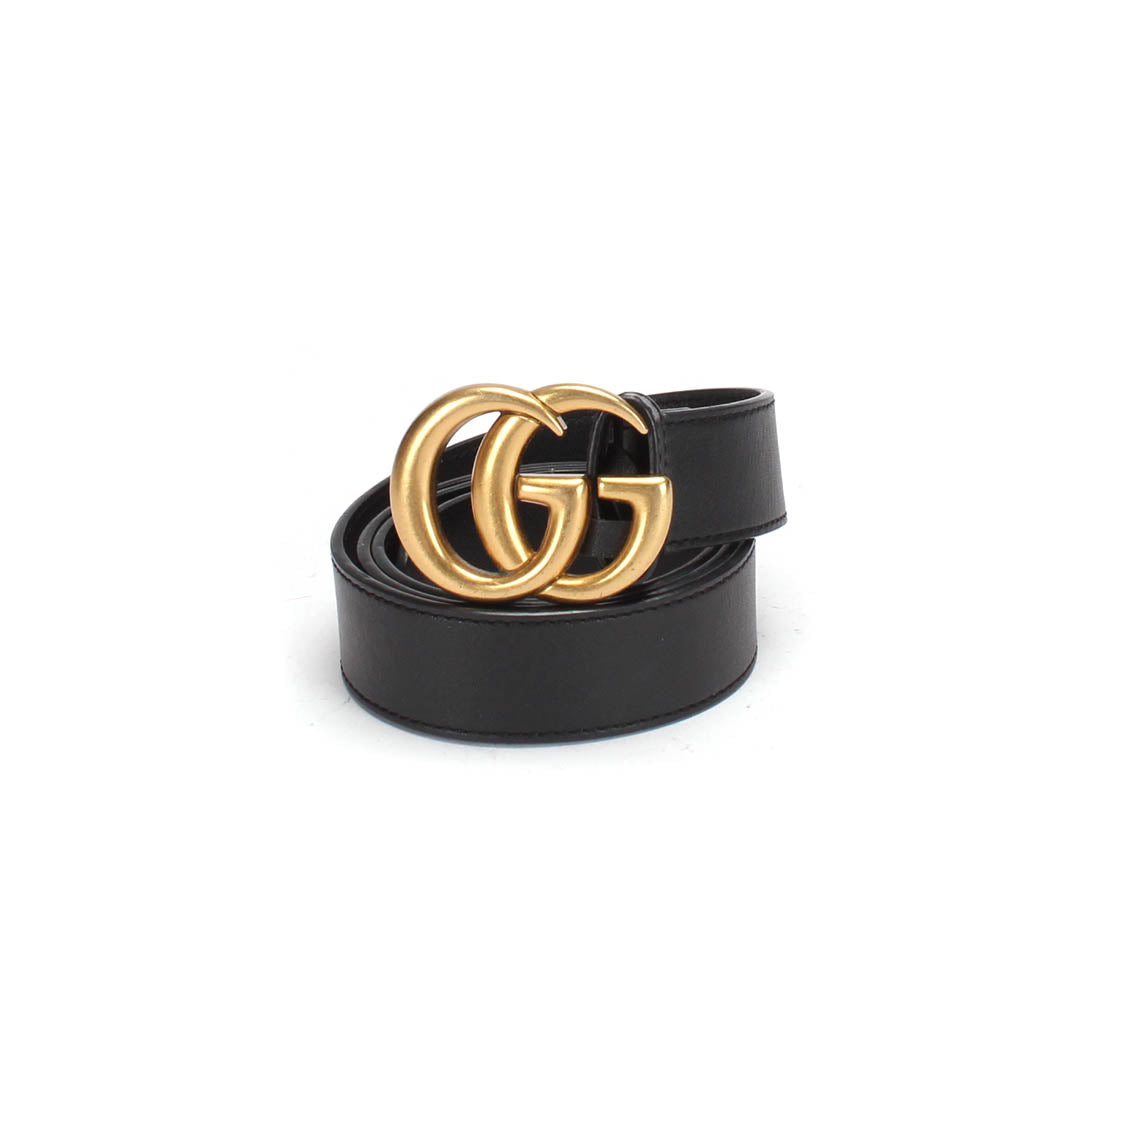 GG Marmont Leather Belt 409417